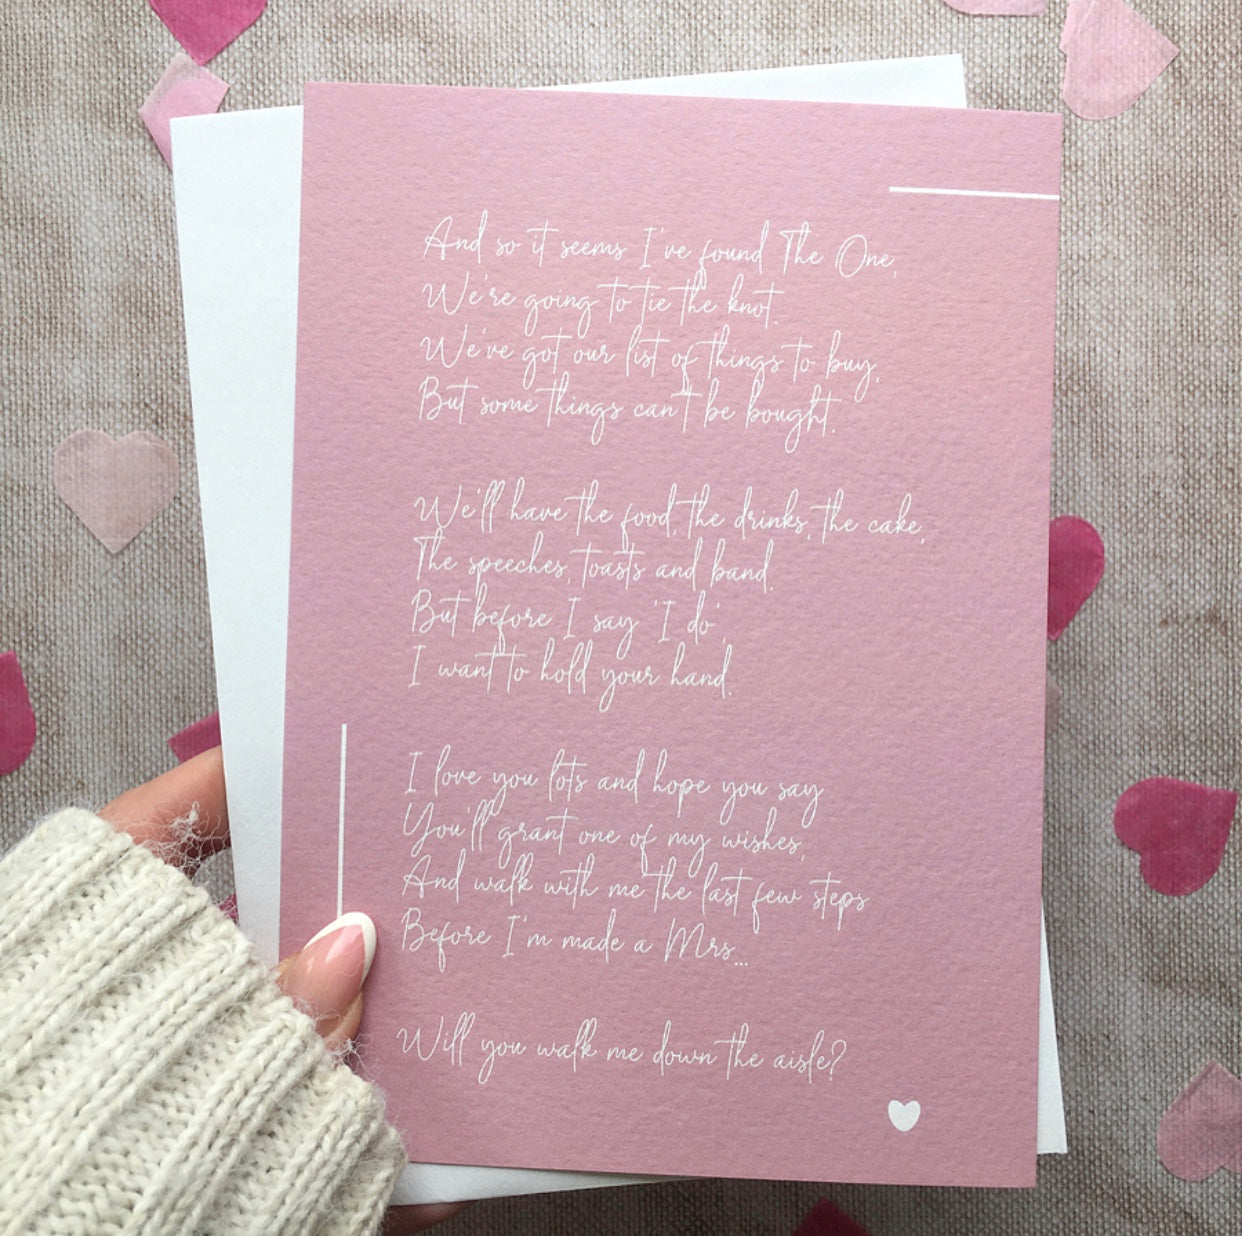 'Will you walk me down the aisle?' Poem Print in Ivory